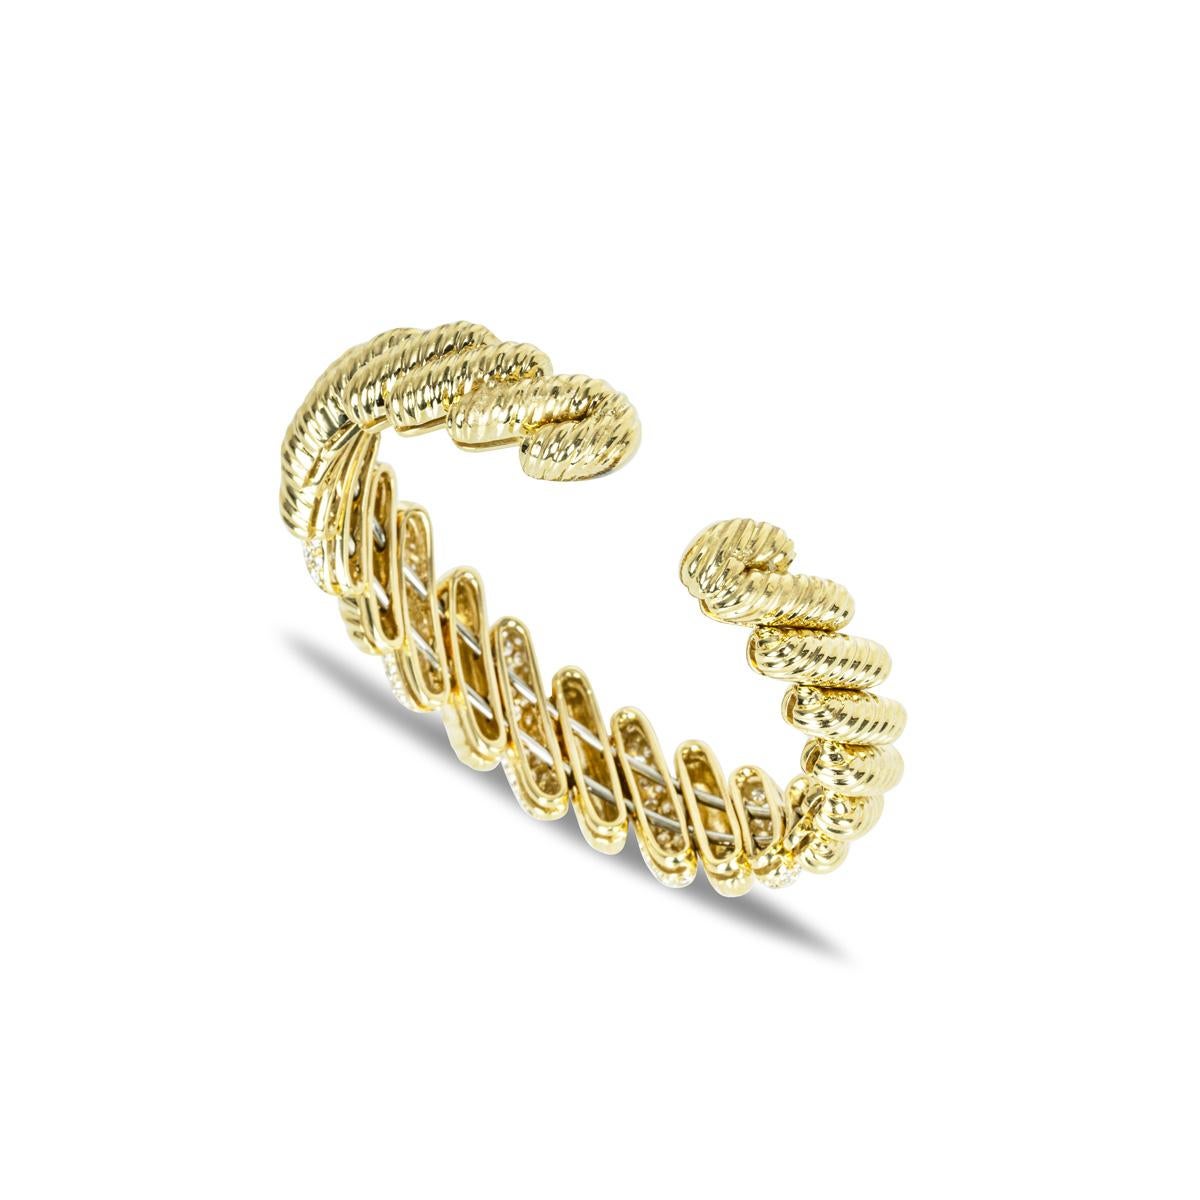 A unique 18k yellow gold diamond cuff bangle. The bracelet features rope pattern links alternating with diamond set links. The diamond links are pave set with 170 round brilliant cut diamonds with an approximate total carat weight of 5.10ct, G-H